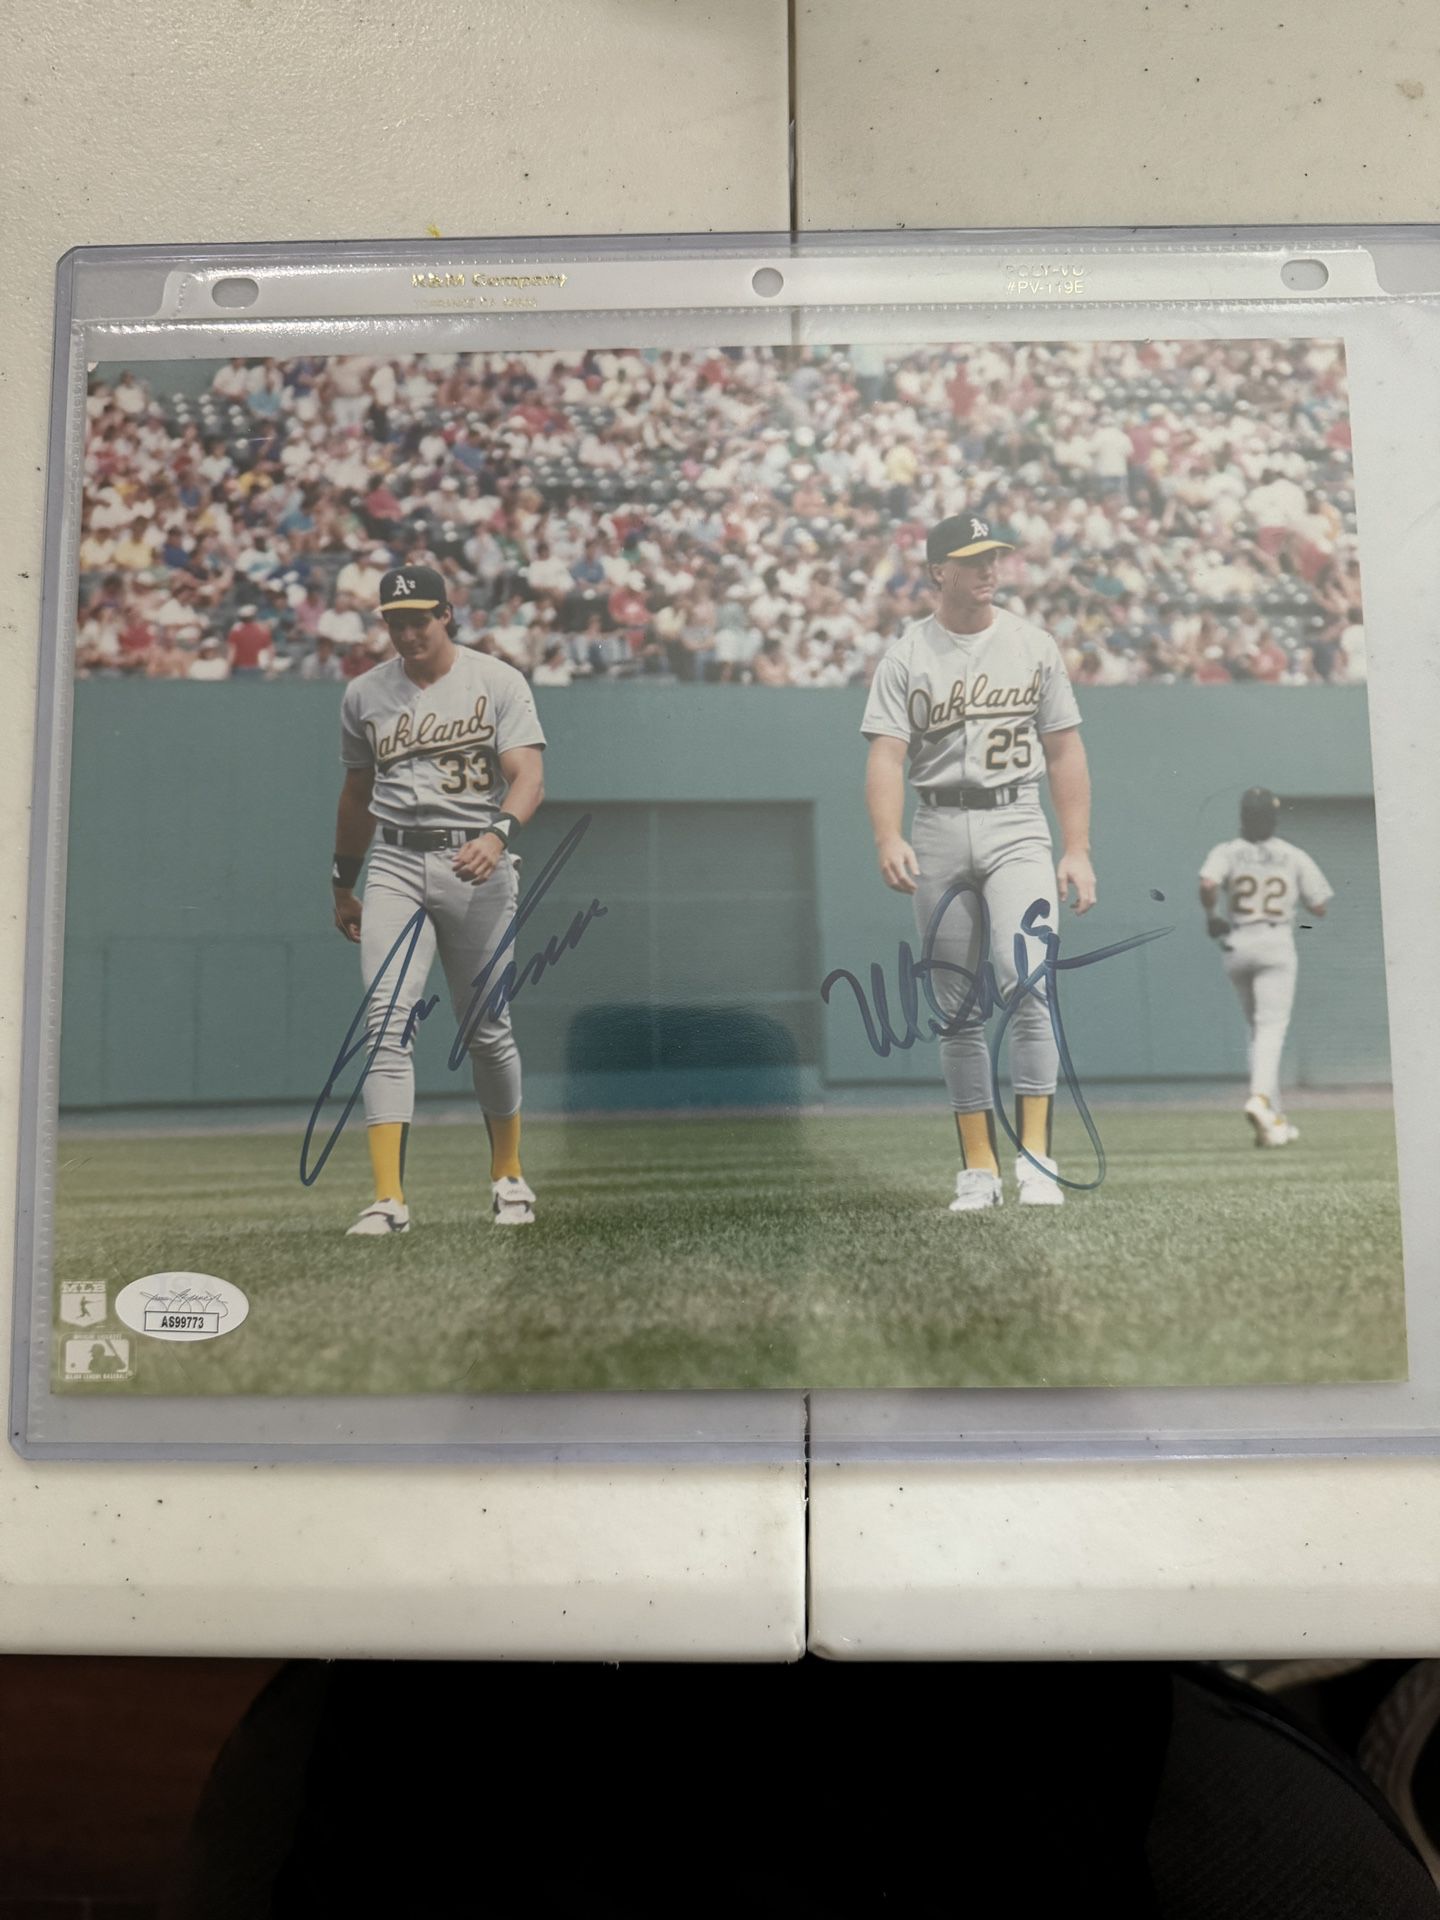 Jose Canseco Mark McGuire “Bash Brothers” Signed / Autographed JSA Certified Photo